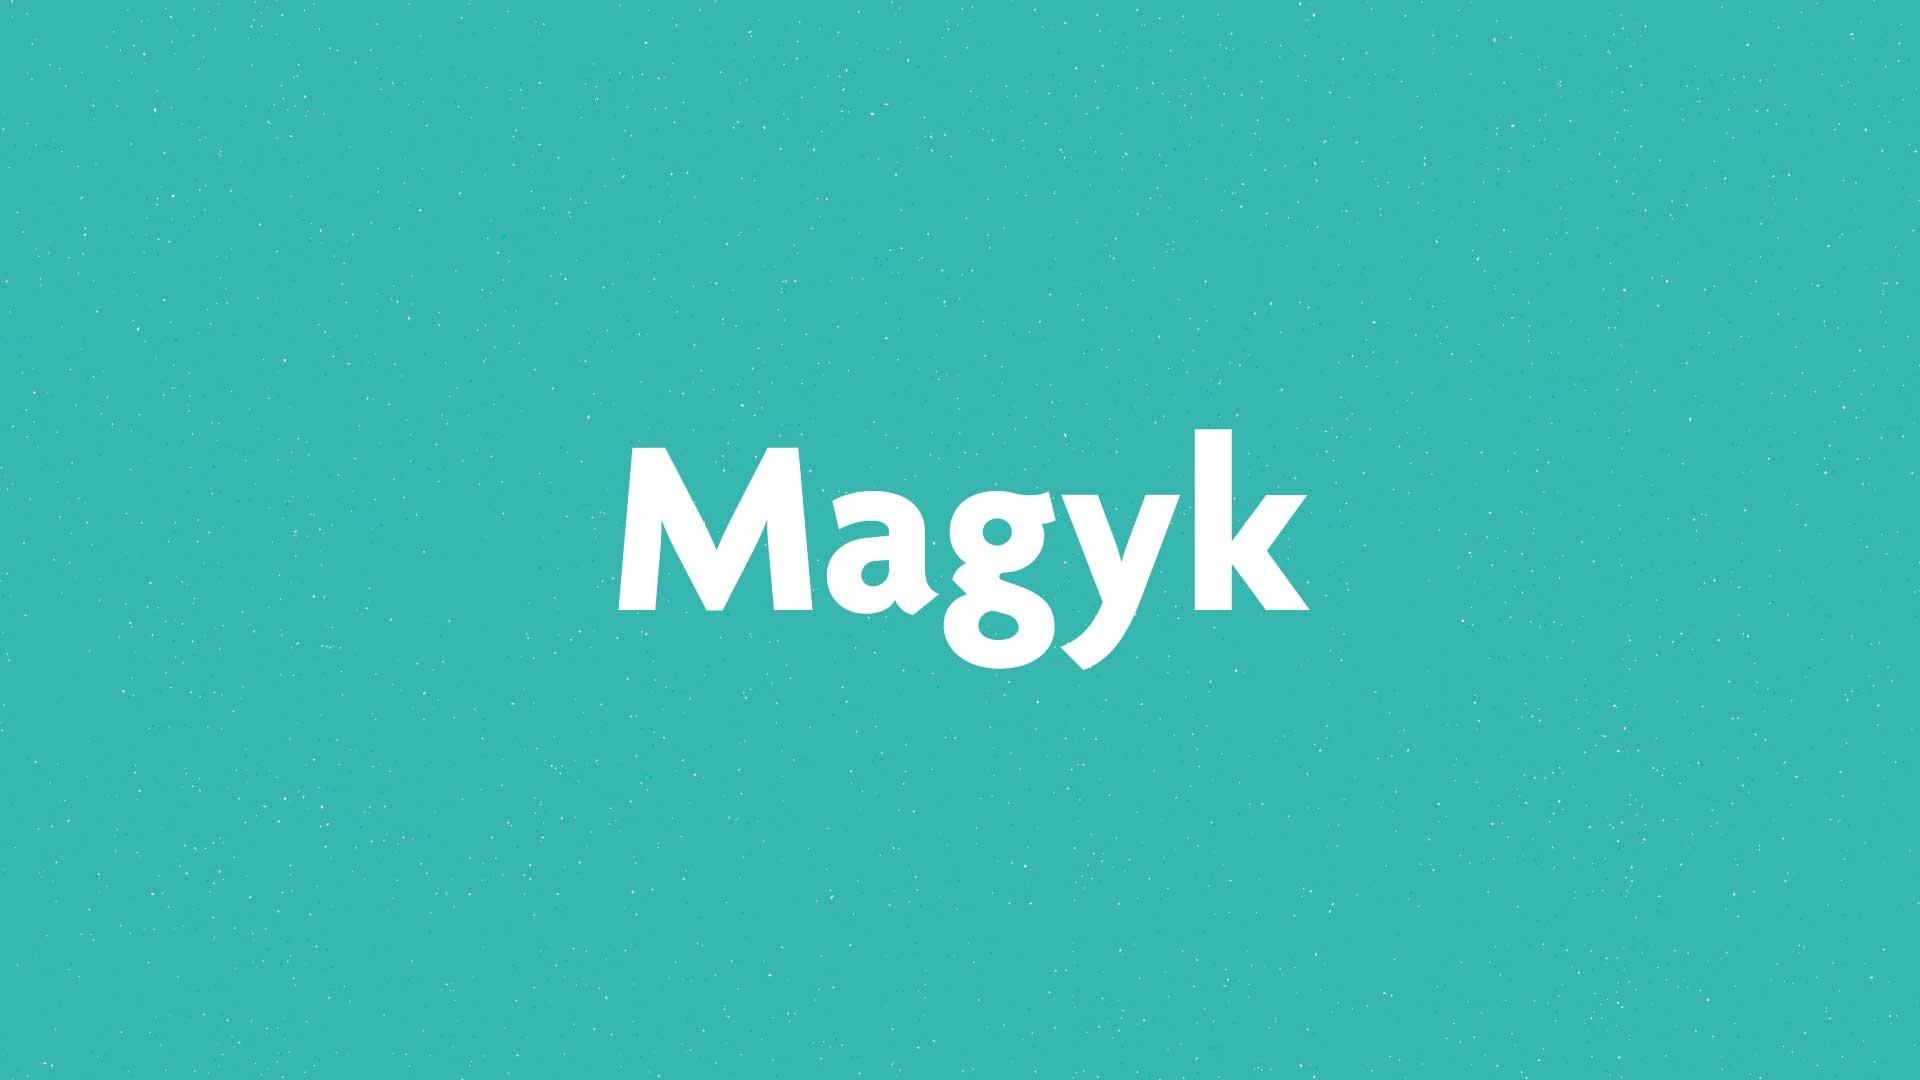 Magyk book submission card on a green background.